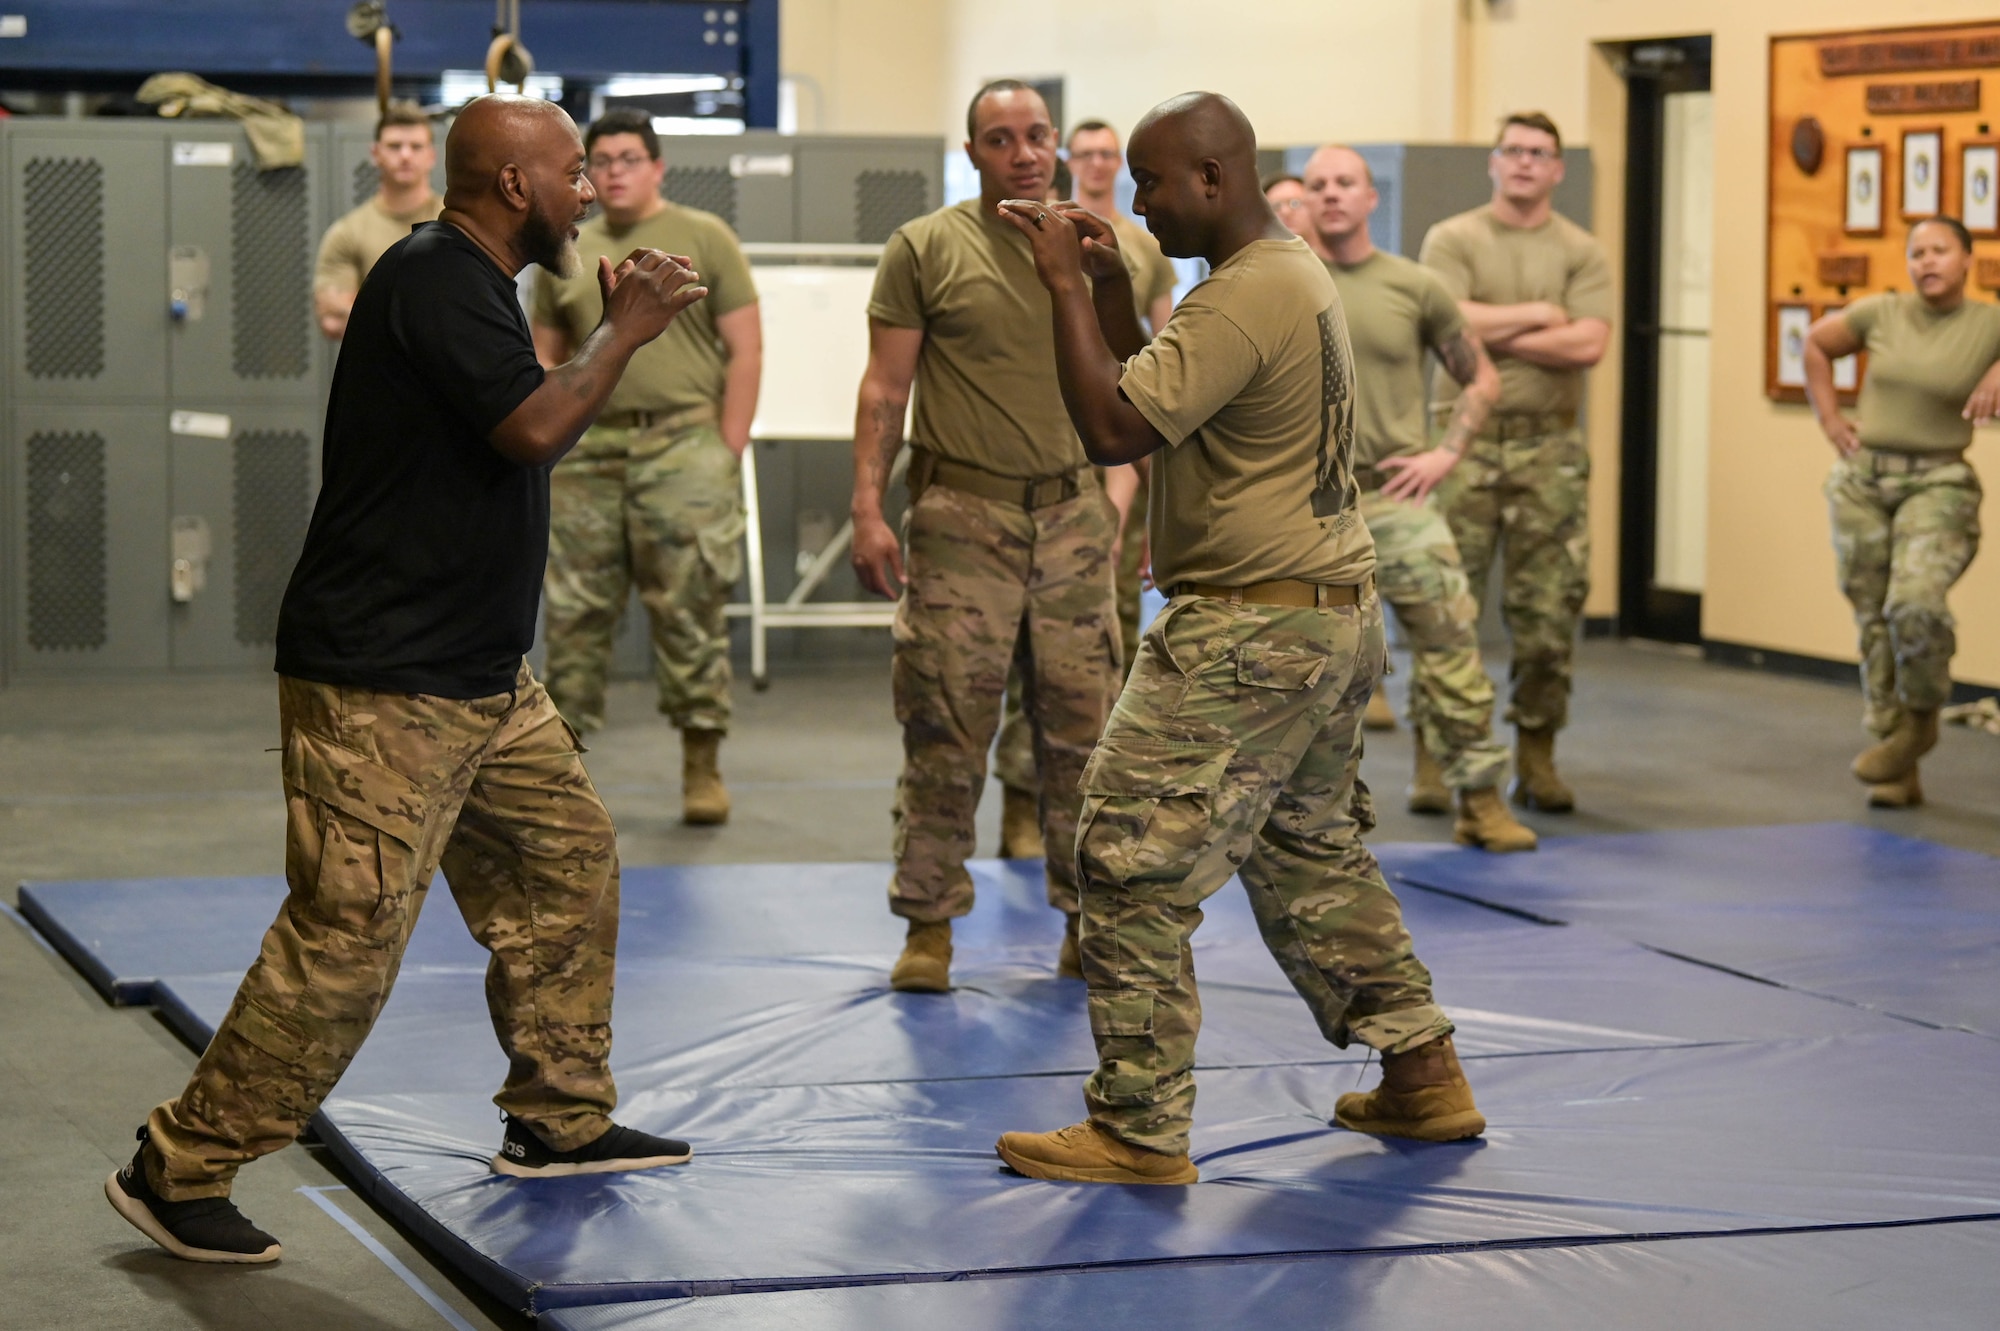 Bobby Cumby, retired security force defender and Office of Special Investigations agent, and Krav Maga instructor, left, holds a fighting stance with U.S. Air Force Staff Sgt. Sheldon Clarke, 23rd Security Force Squadron S3O-B2 “Thunder Cats” flight sergeant, right, during the first iteration of Krav Maga training, April 13, 2022, at Moody Air Force Base, Georgia. Krav Maga translates to “close combat,” and the guiding principle is self-protection while neutralizing the threat at hand. (U.S. Air Force photo by Senior Airman Rebeckah Medeiros)